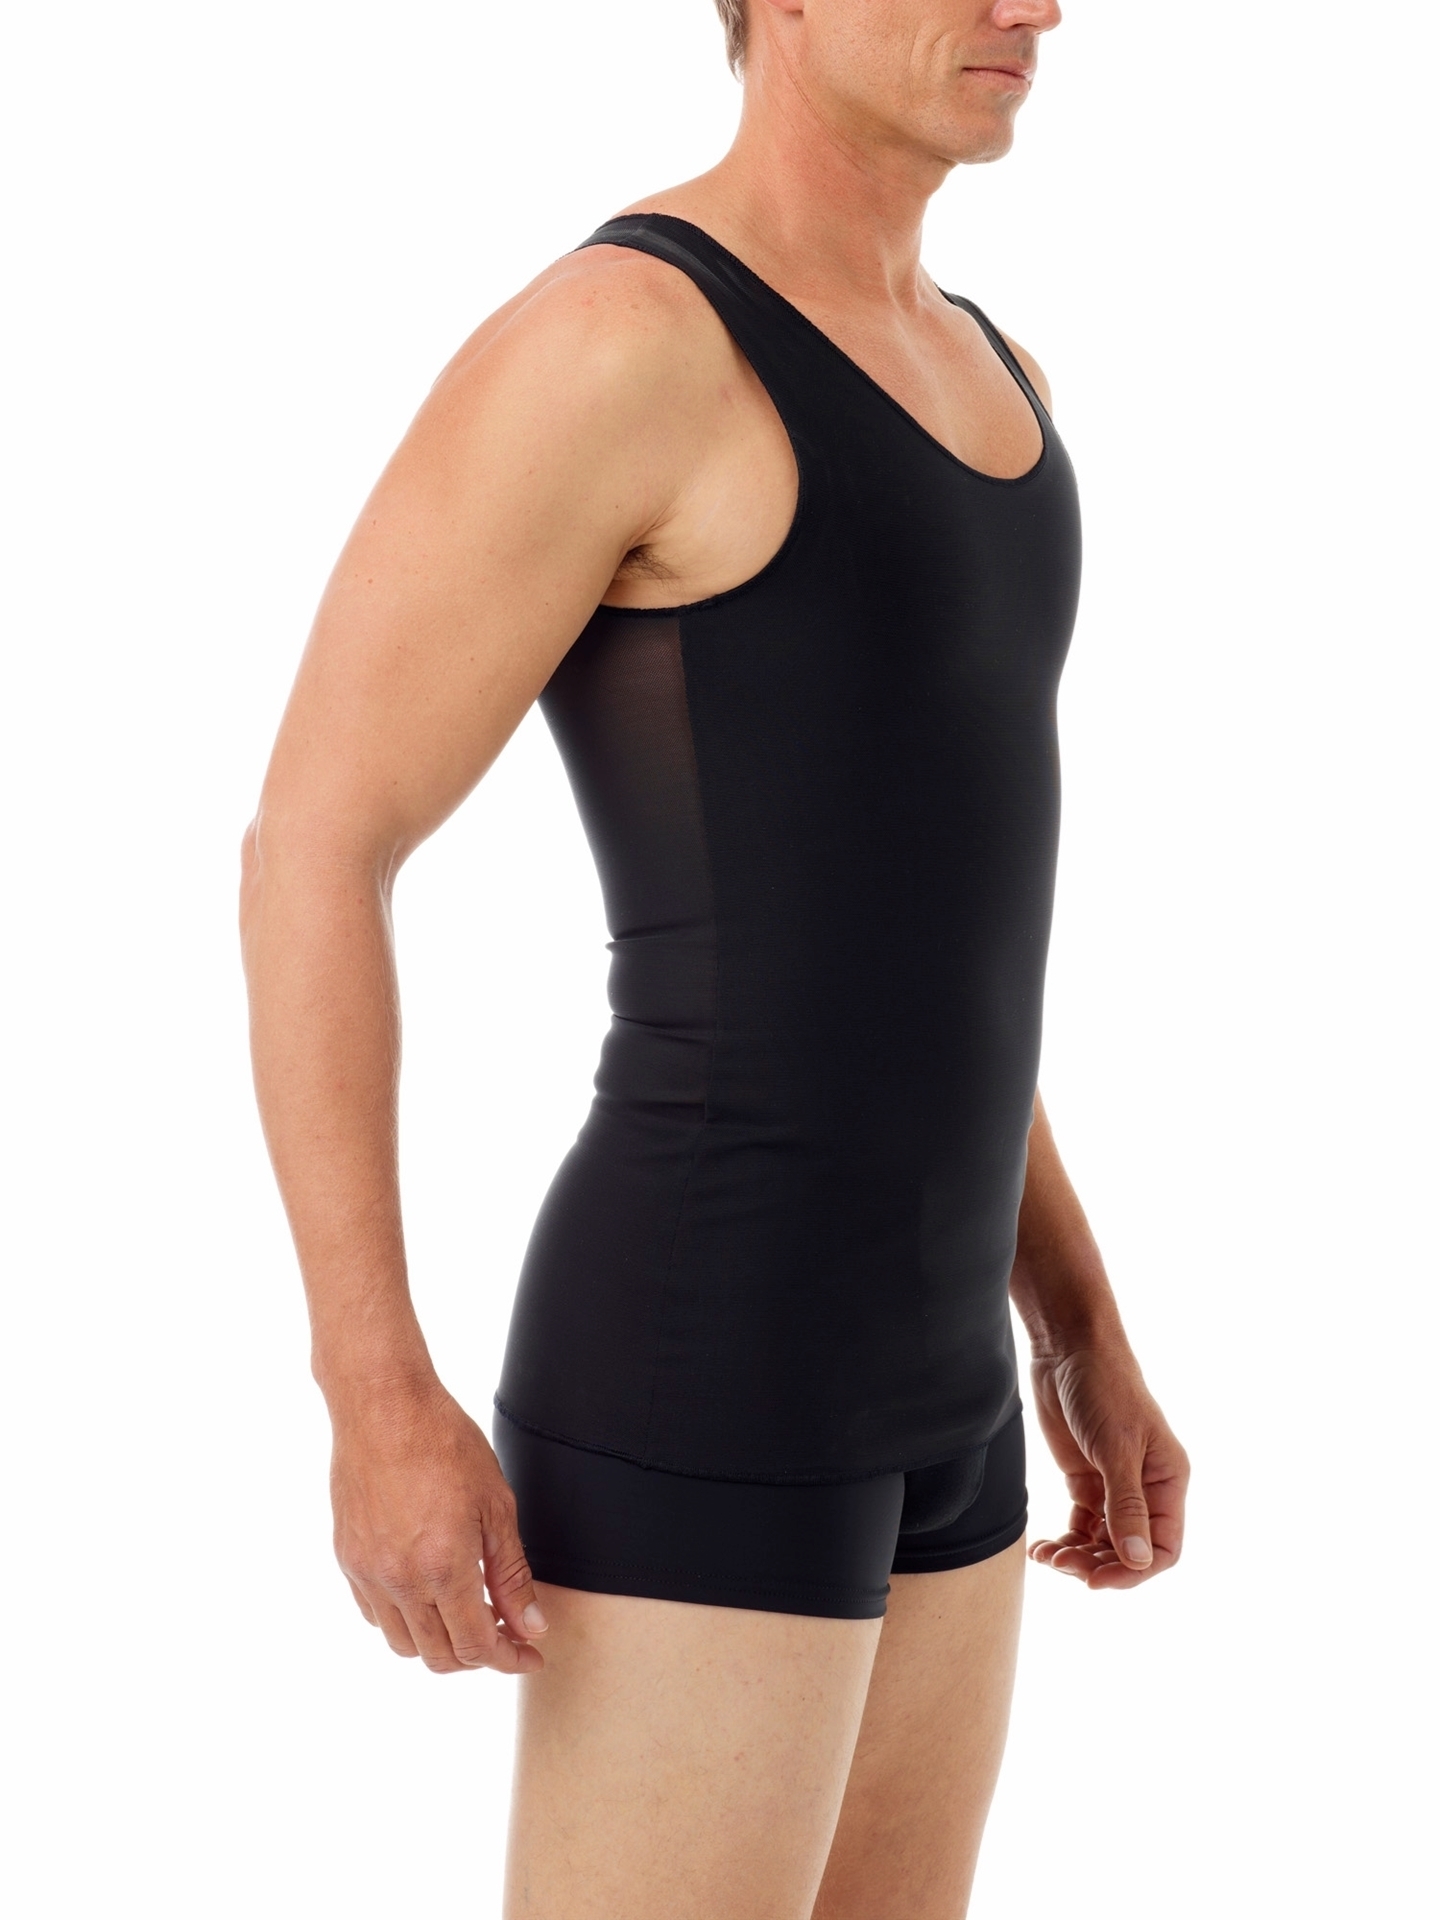 Adjustable Chest Binder Shapewear Tank Top For Gym, Running, And